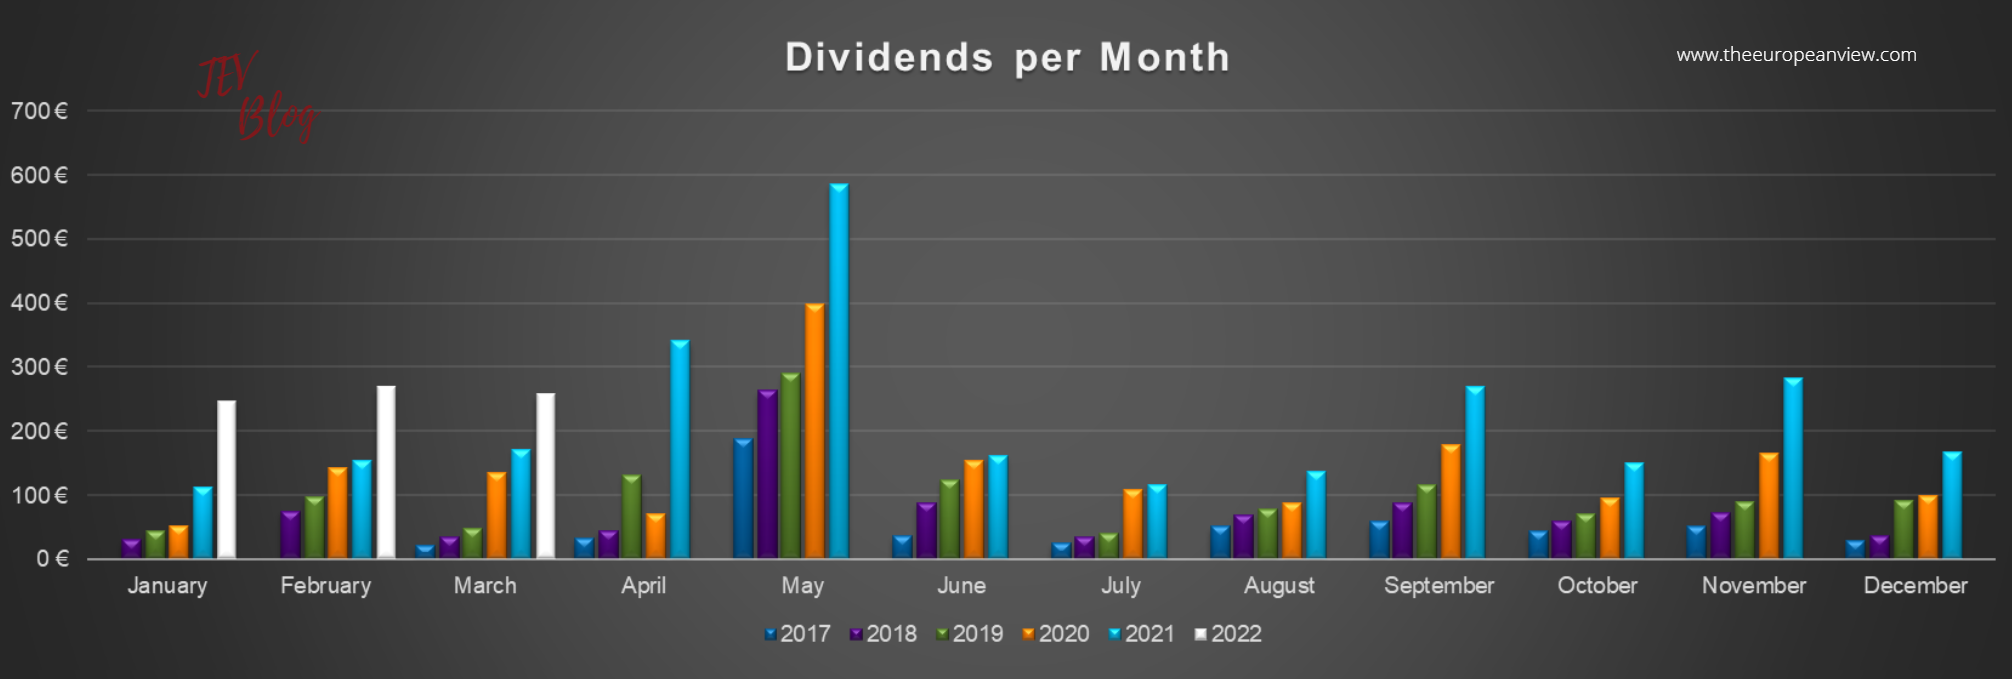 TEV Blog Dividend Monthly Income Report: Dividends per month in March are coming in with a beautiful innocent white